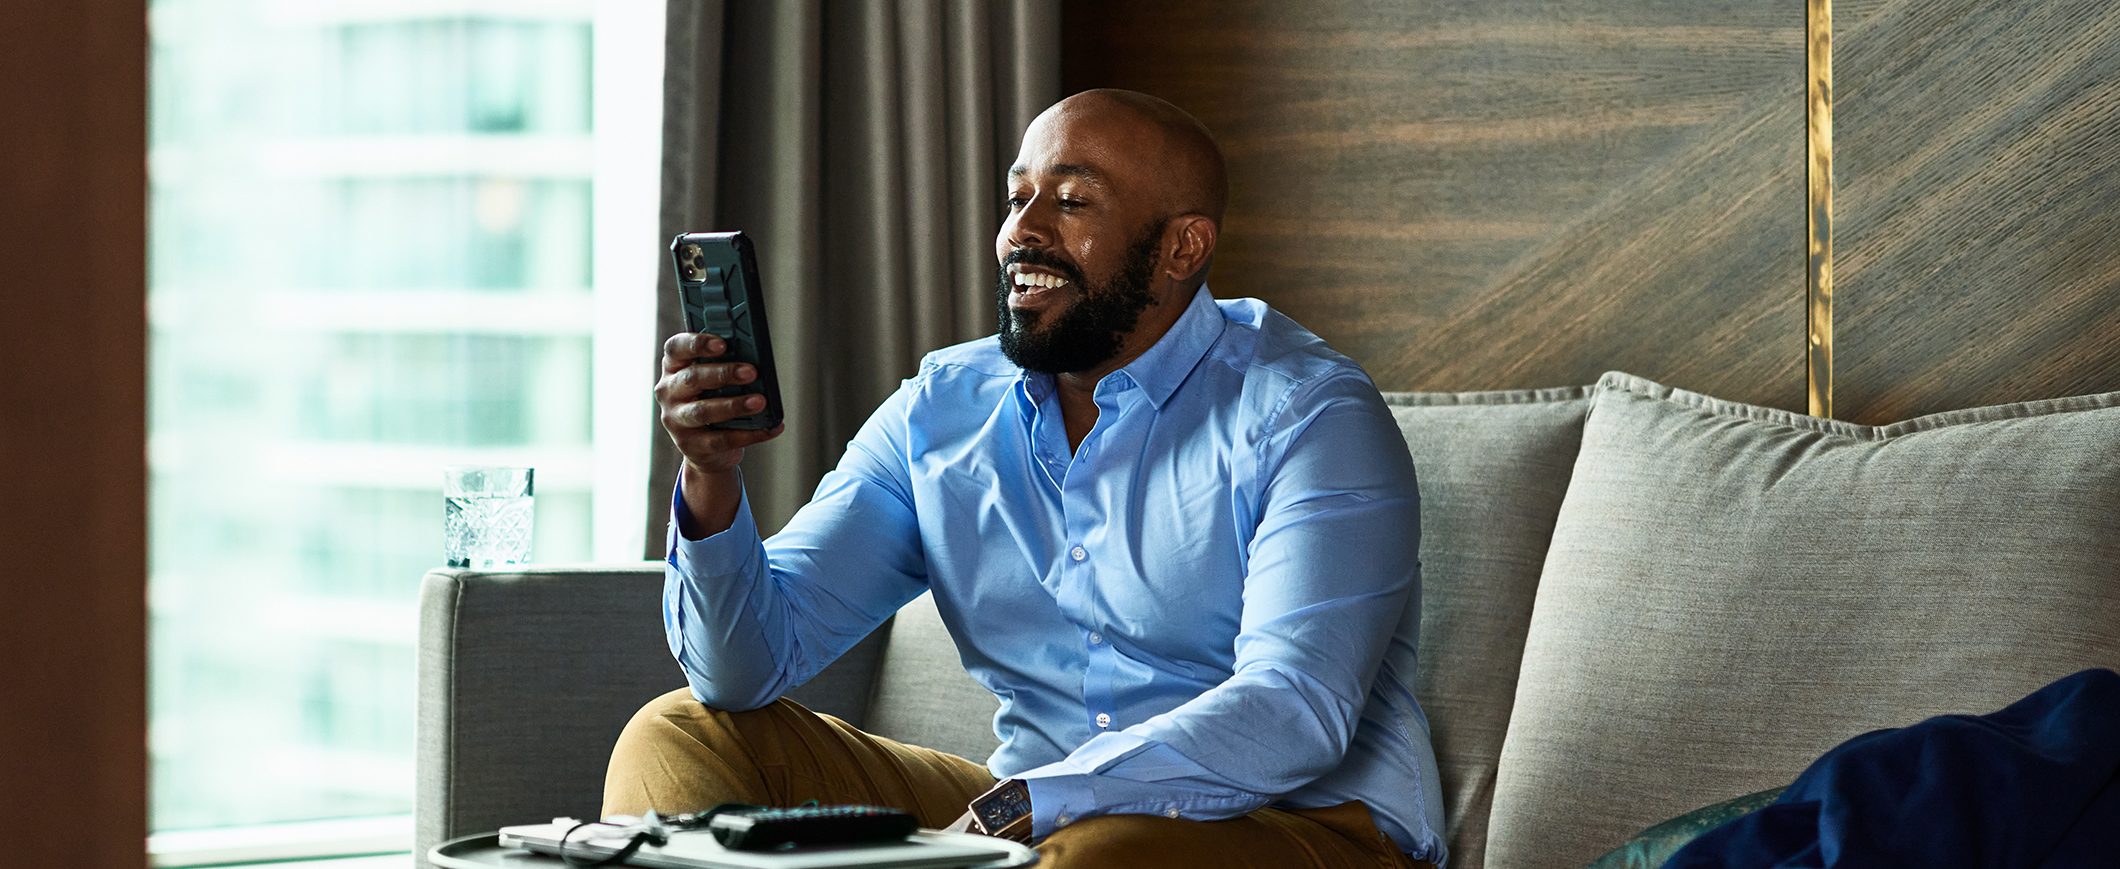 A man sits on a couch smiling at his mobile device.